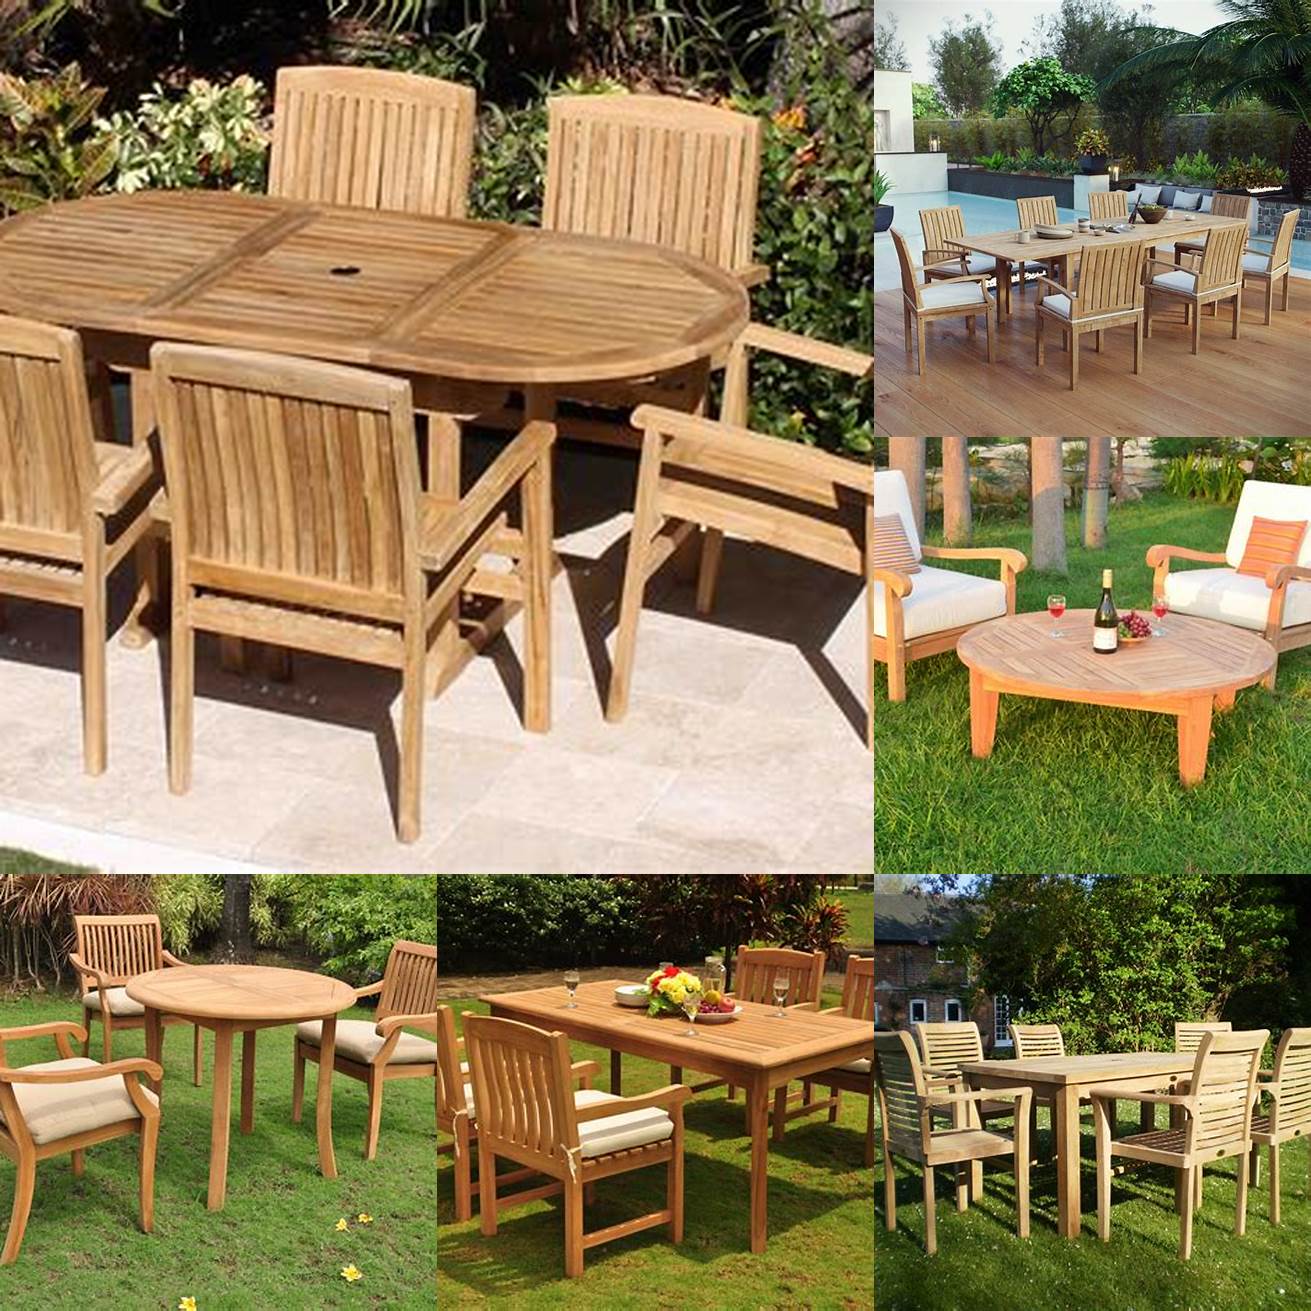 A picture of plantation teak furniture in an outdoor setting